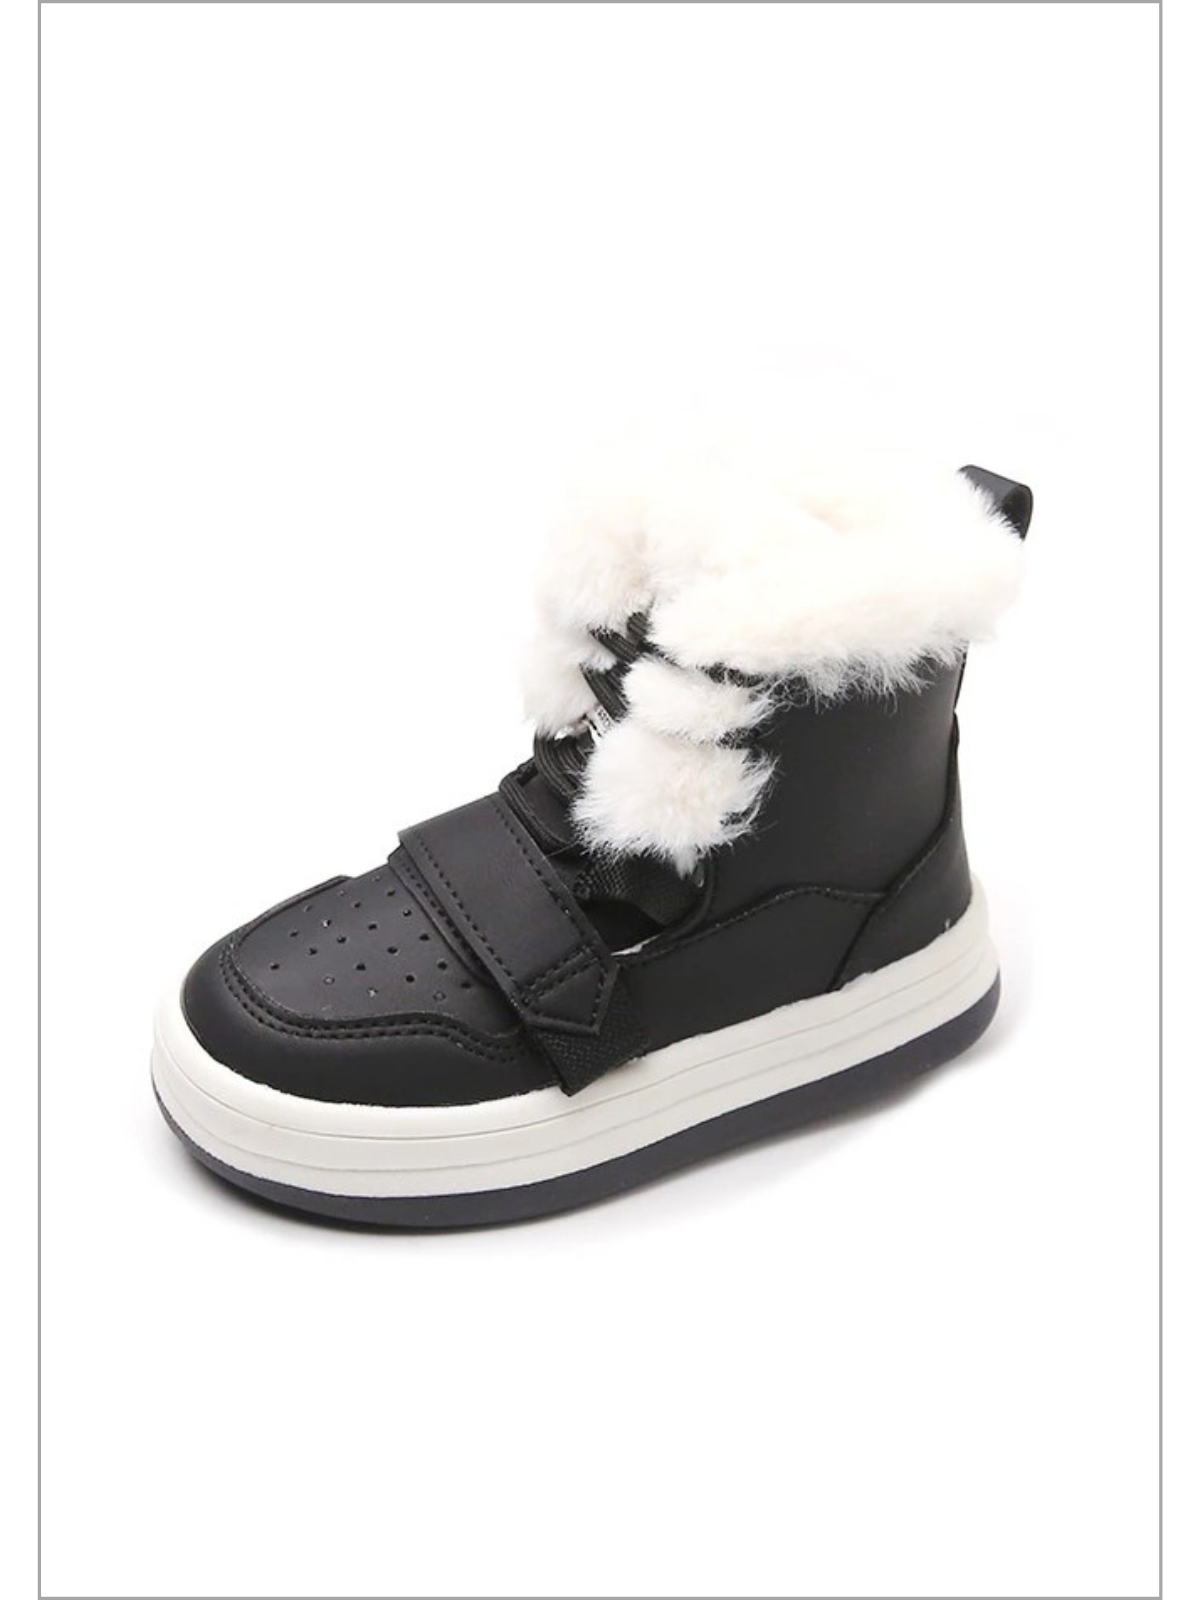 Girls Shoes By Liv and Mia | Black Faux Fur Lined Snow Boots 